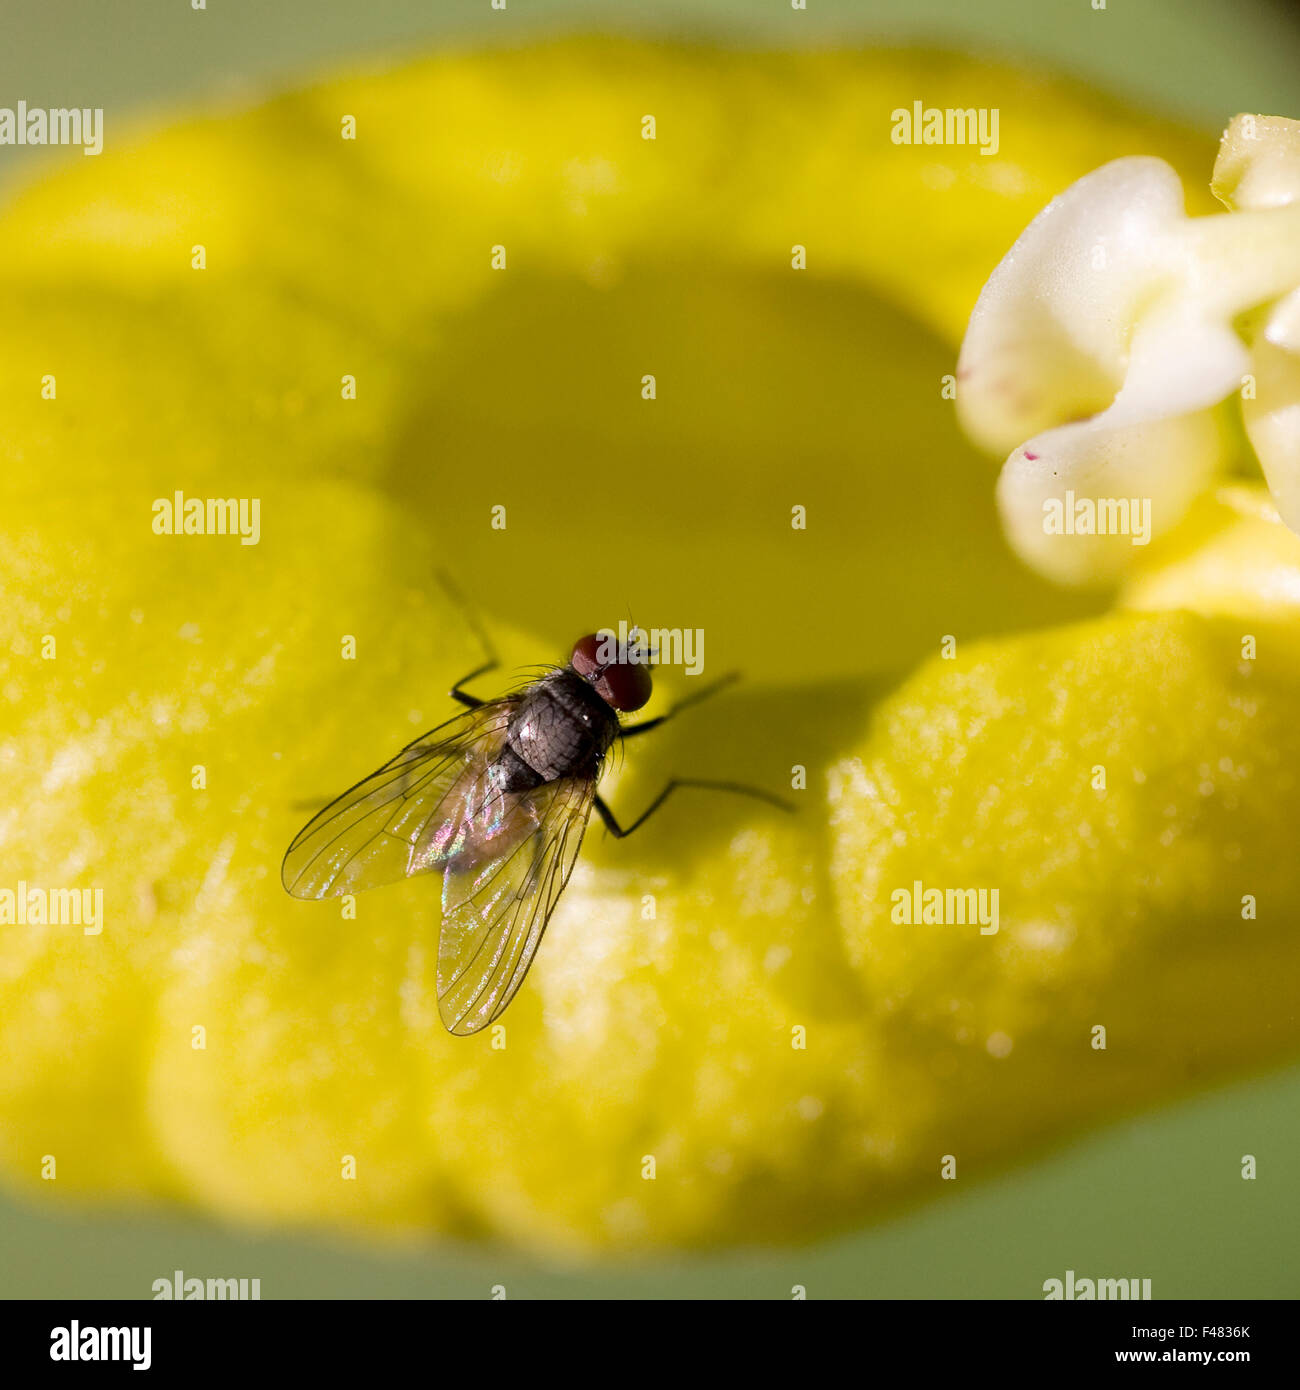 A fly on a Lady''s slipper, close-up, Sweden. Stock Photo